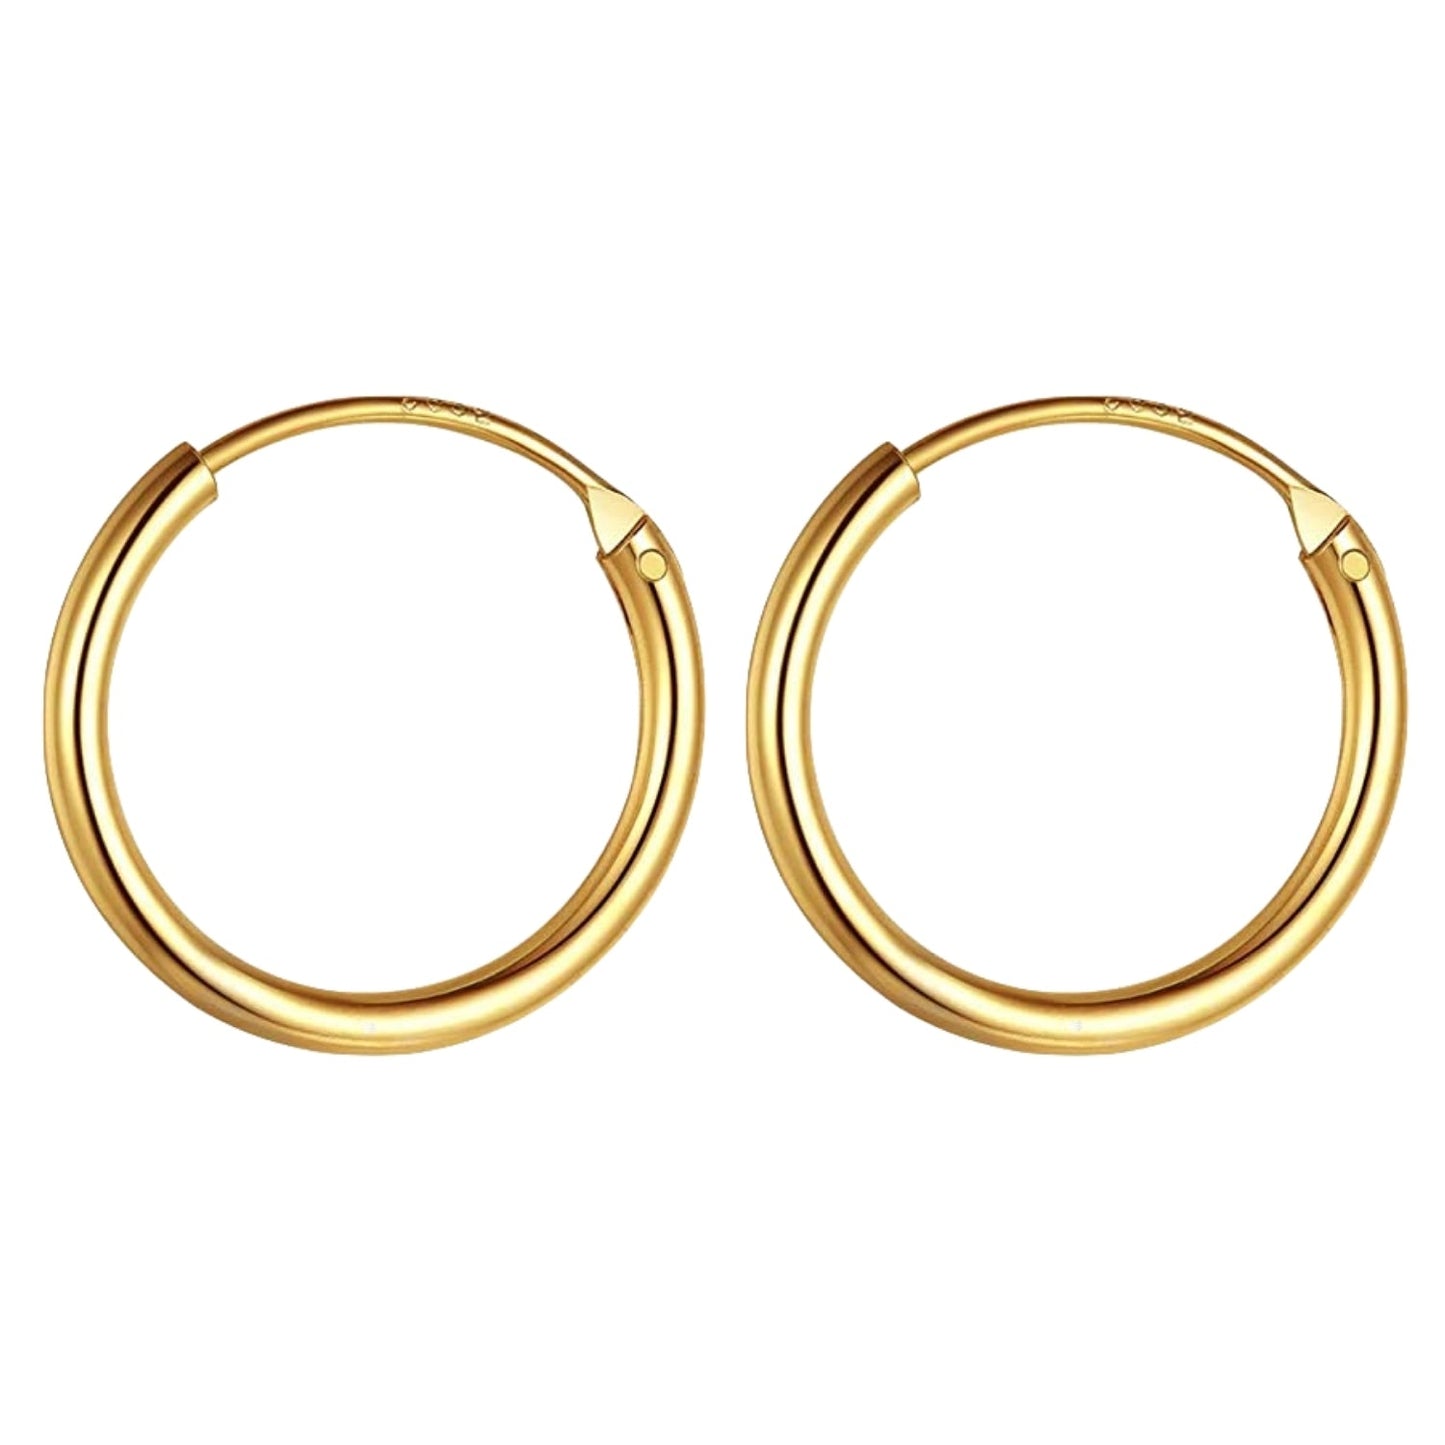 Classic Gold Hoop Earrings in 92.5 Silver - 1.2mm Thickness - Small Sizes 10mm to 20mm -  18K Gold finish